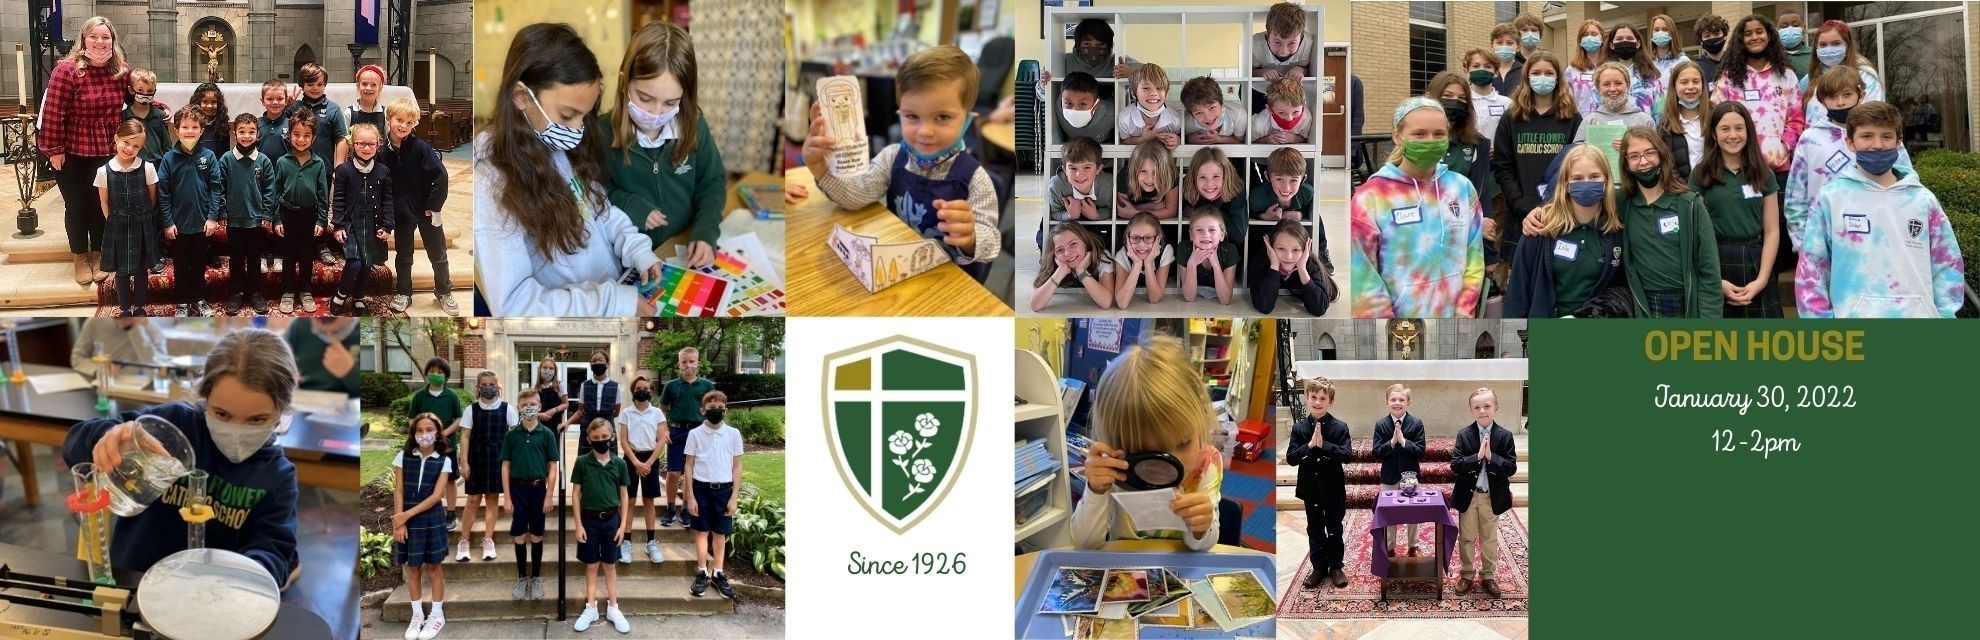 collage of photos promoting open house 